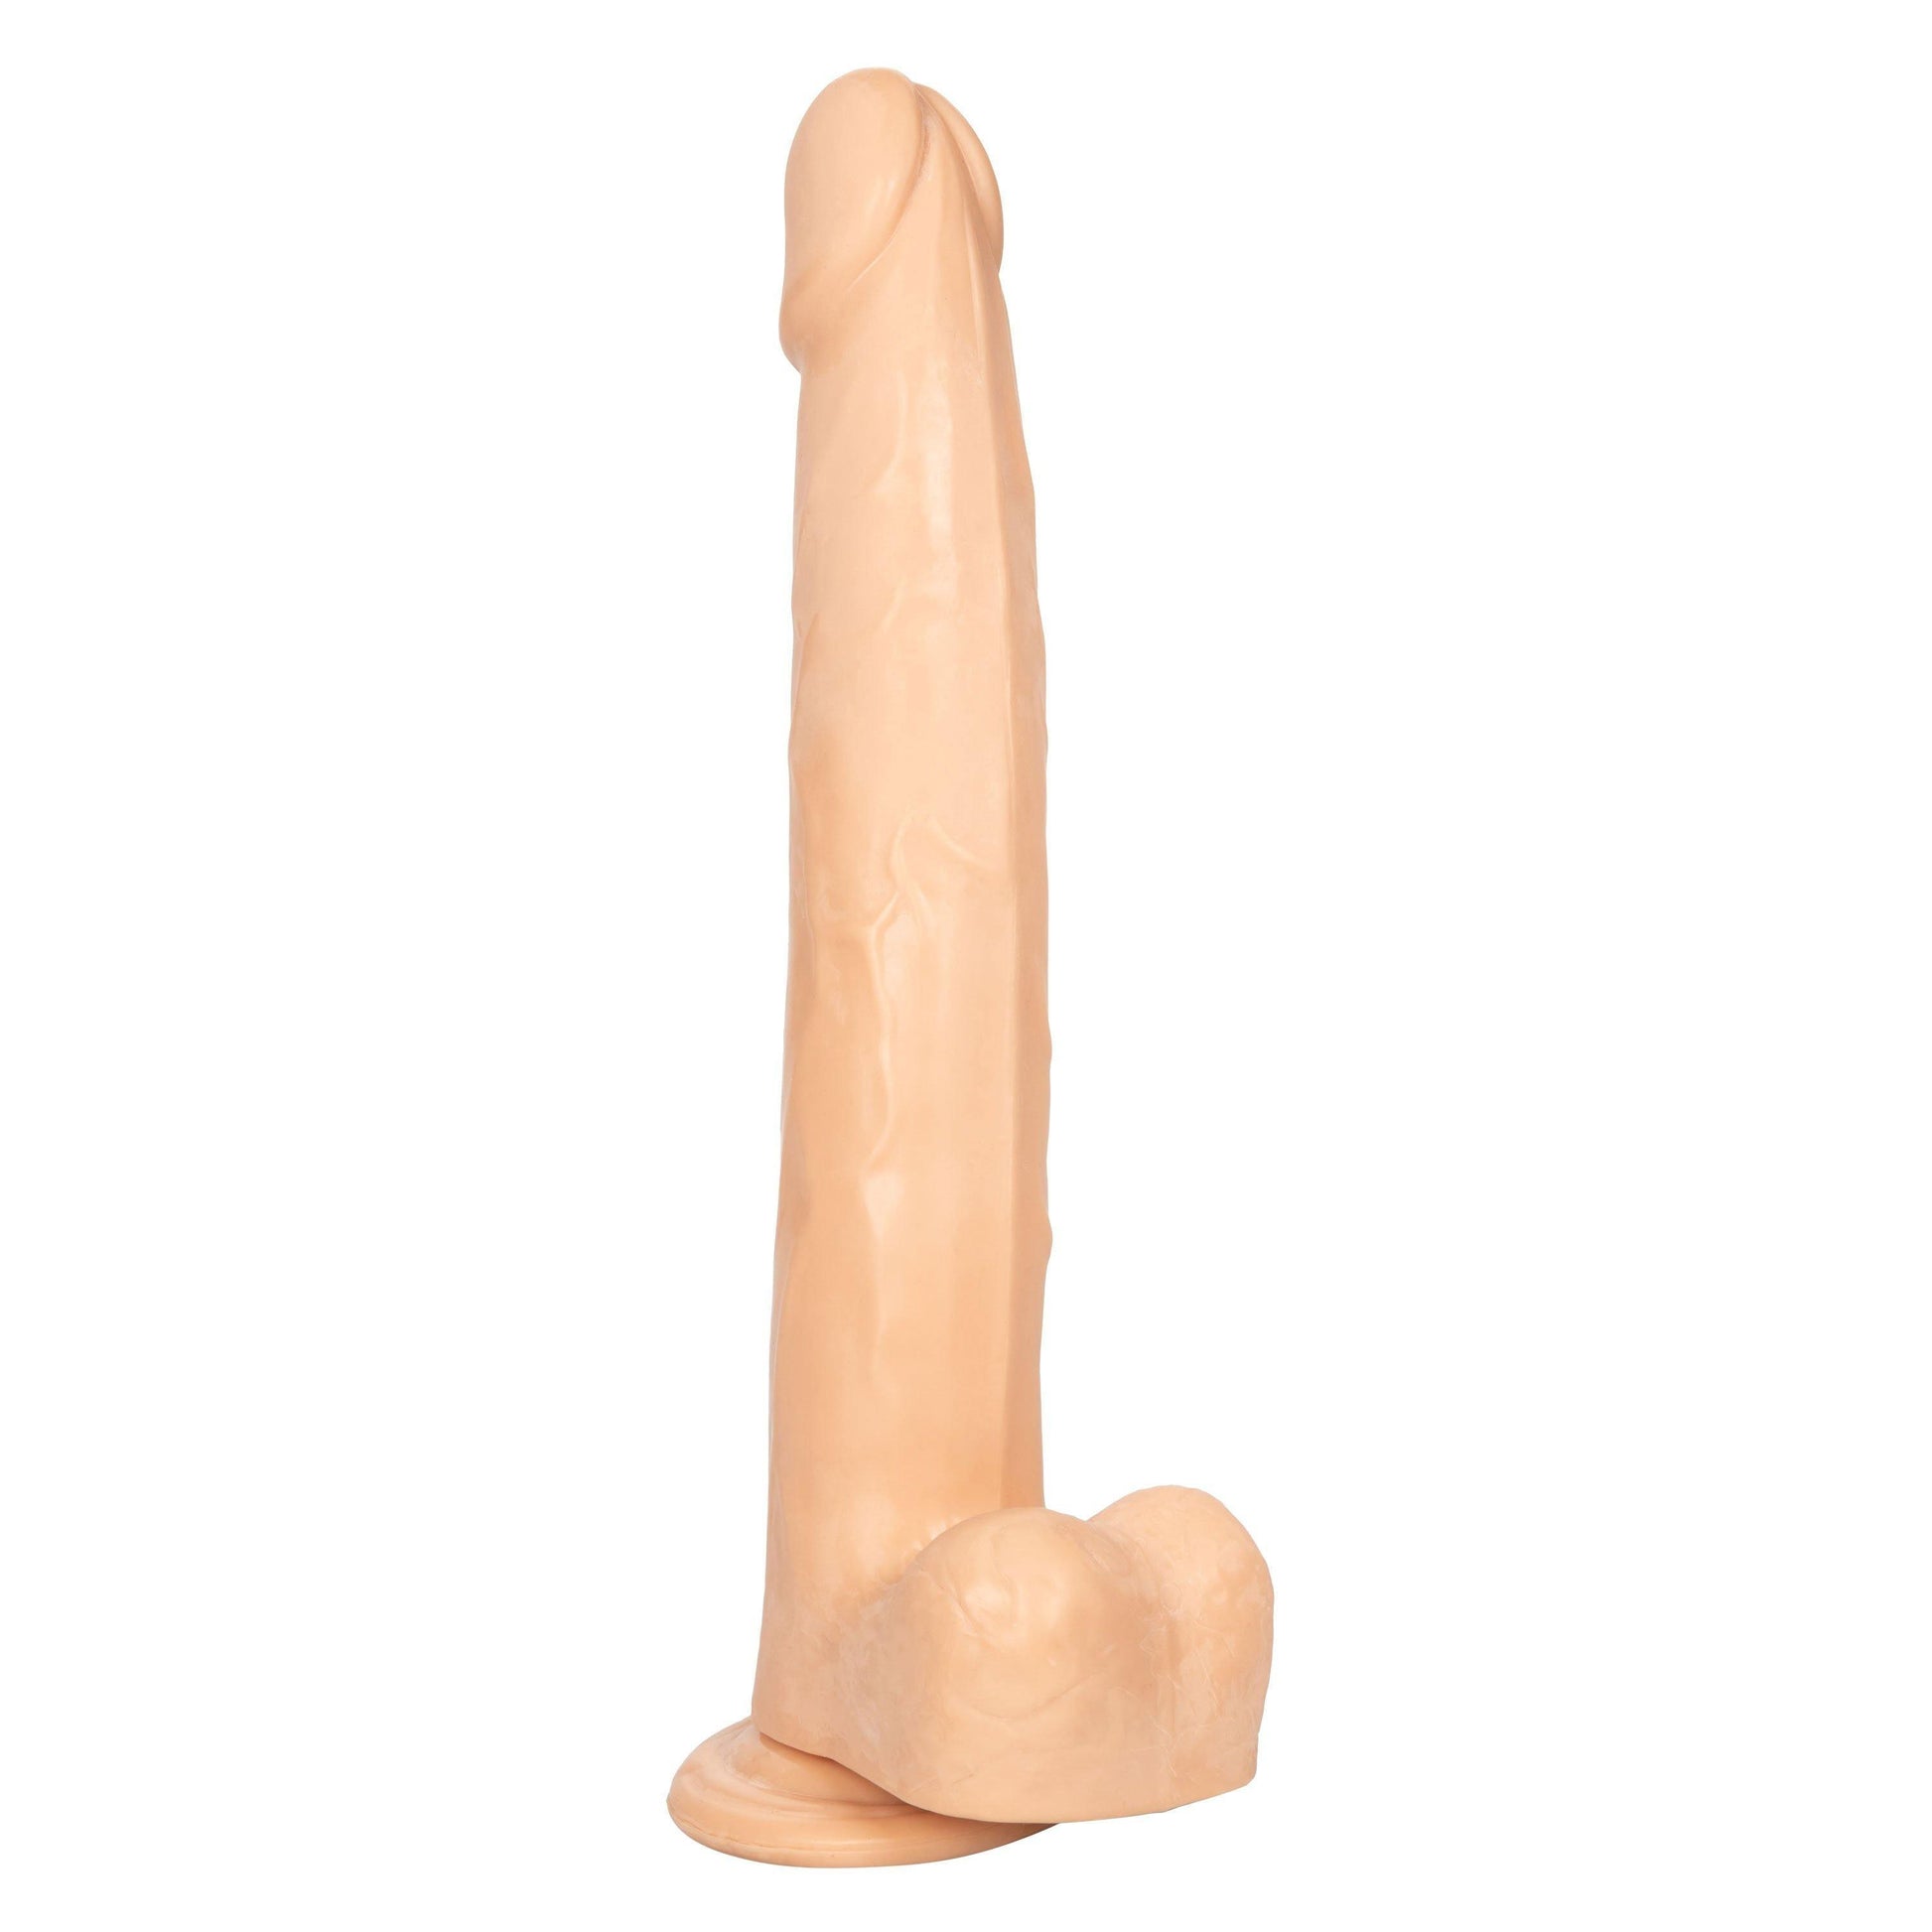 Size Queen 12 inch/30.5 Cm - Ivory - My Sex Toy Hub